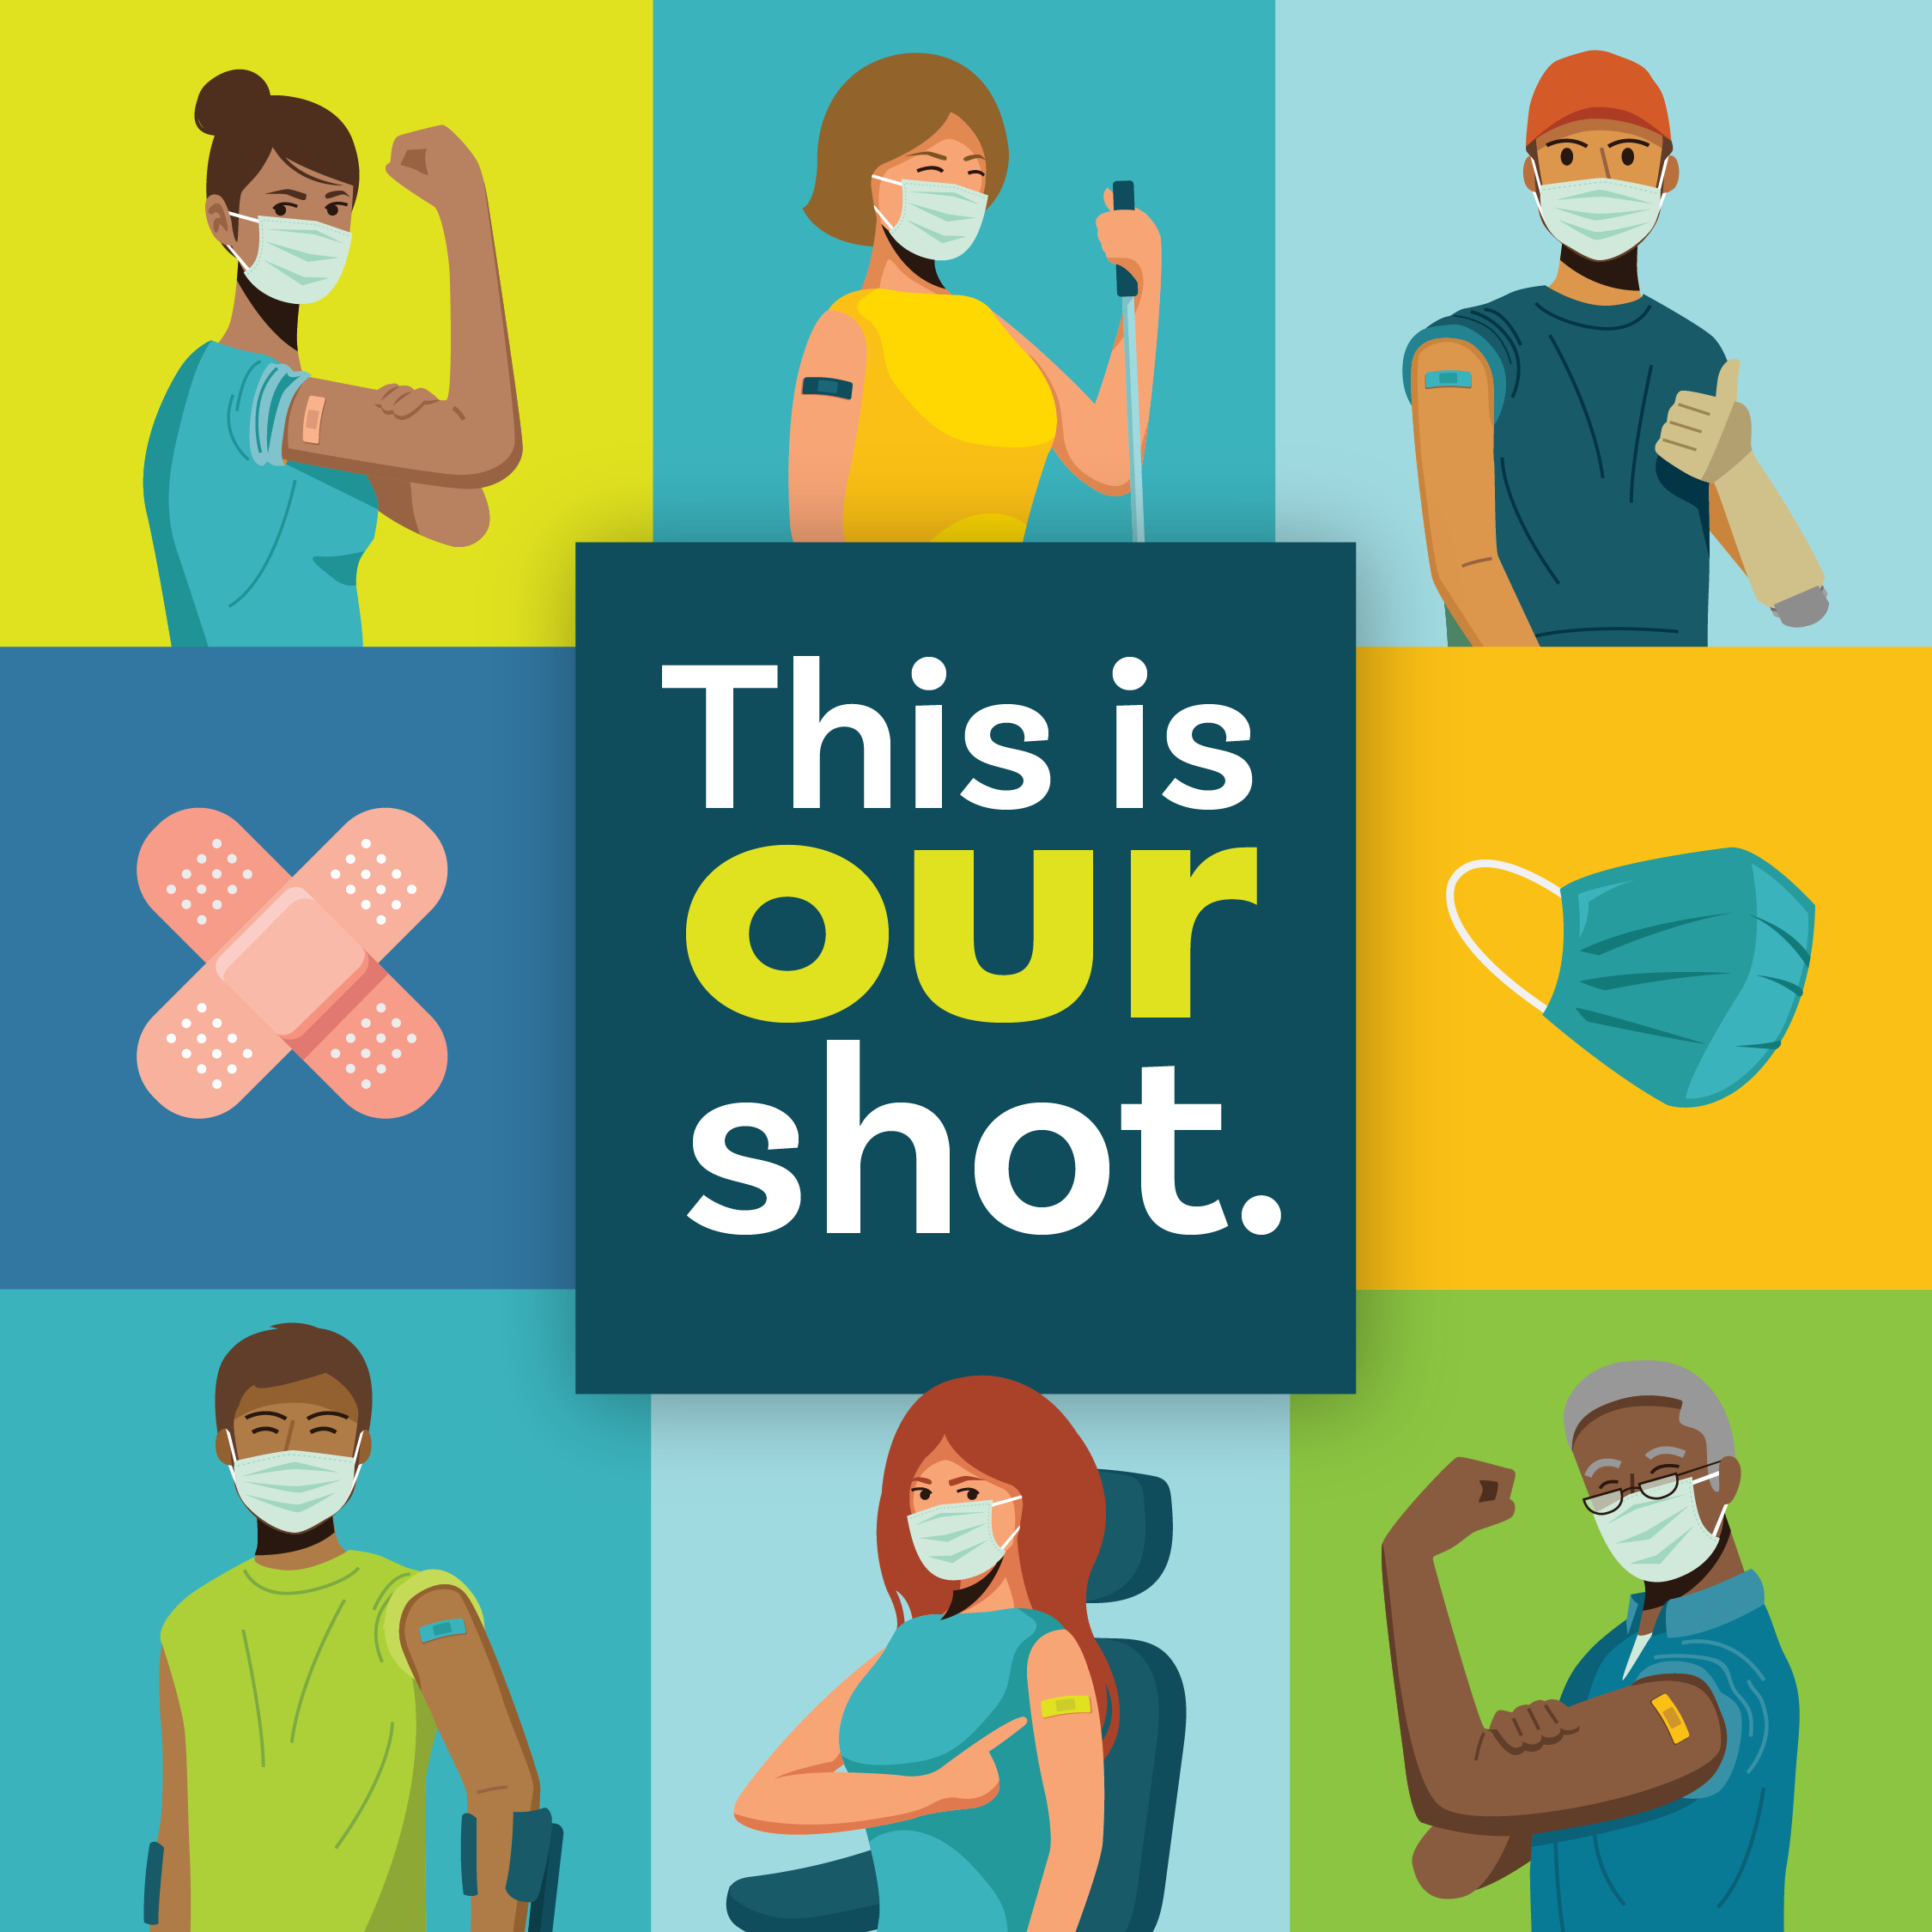 Graphic illustration of eight boxes with one box in the center that has the campaign message. It reads This is Our Shot. All letters are white except our, which is bright green over a dark blue background. Remaining illustrations include a young Latino woman in a mask holding up her arm with a bandaid on it in front of a light green background, woman with a visual disability with a mask on and bandaid on her arm in front of a teal background, young man with a mask and bandaid on his arm and a prosthetic arm holding a thumbs up in front of a light blue background, two bandaids in an x shape on a dark blue background, blue face mask on a yellow background, young Black man with a mask on and bandaid on his arm with crutches on a teal background, white woman with a mask on and pointing to a bandaid on her arm in a wheelchair on a light blue background, and an older Black man with a mask on and a bandaid on his arm holding up his arm on a light green background.